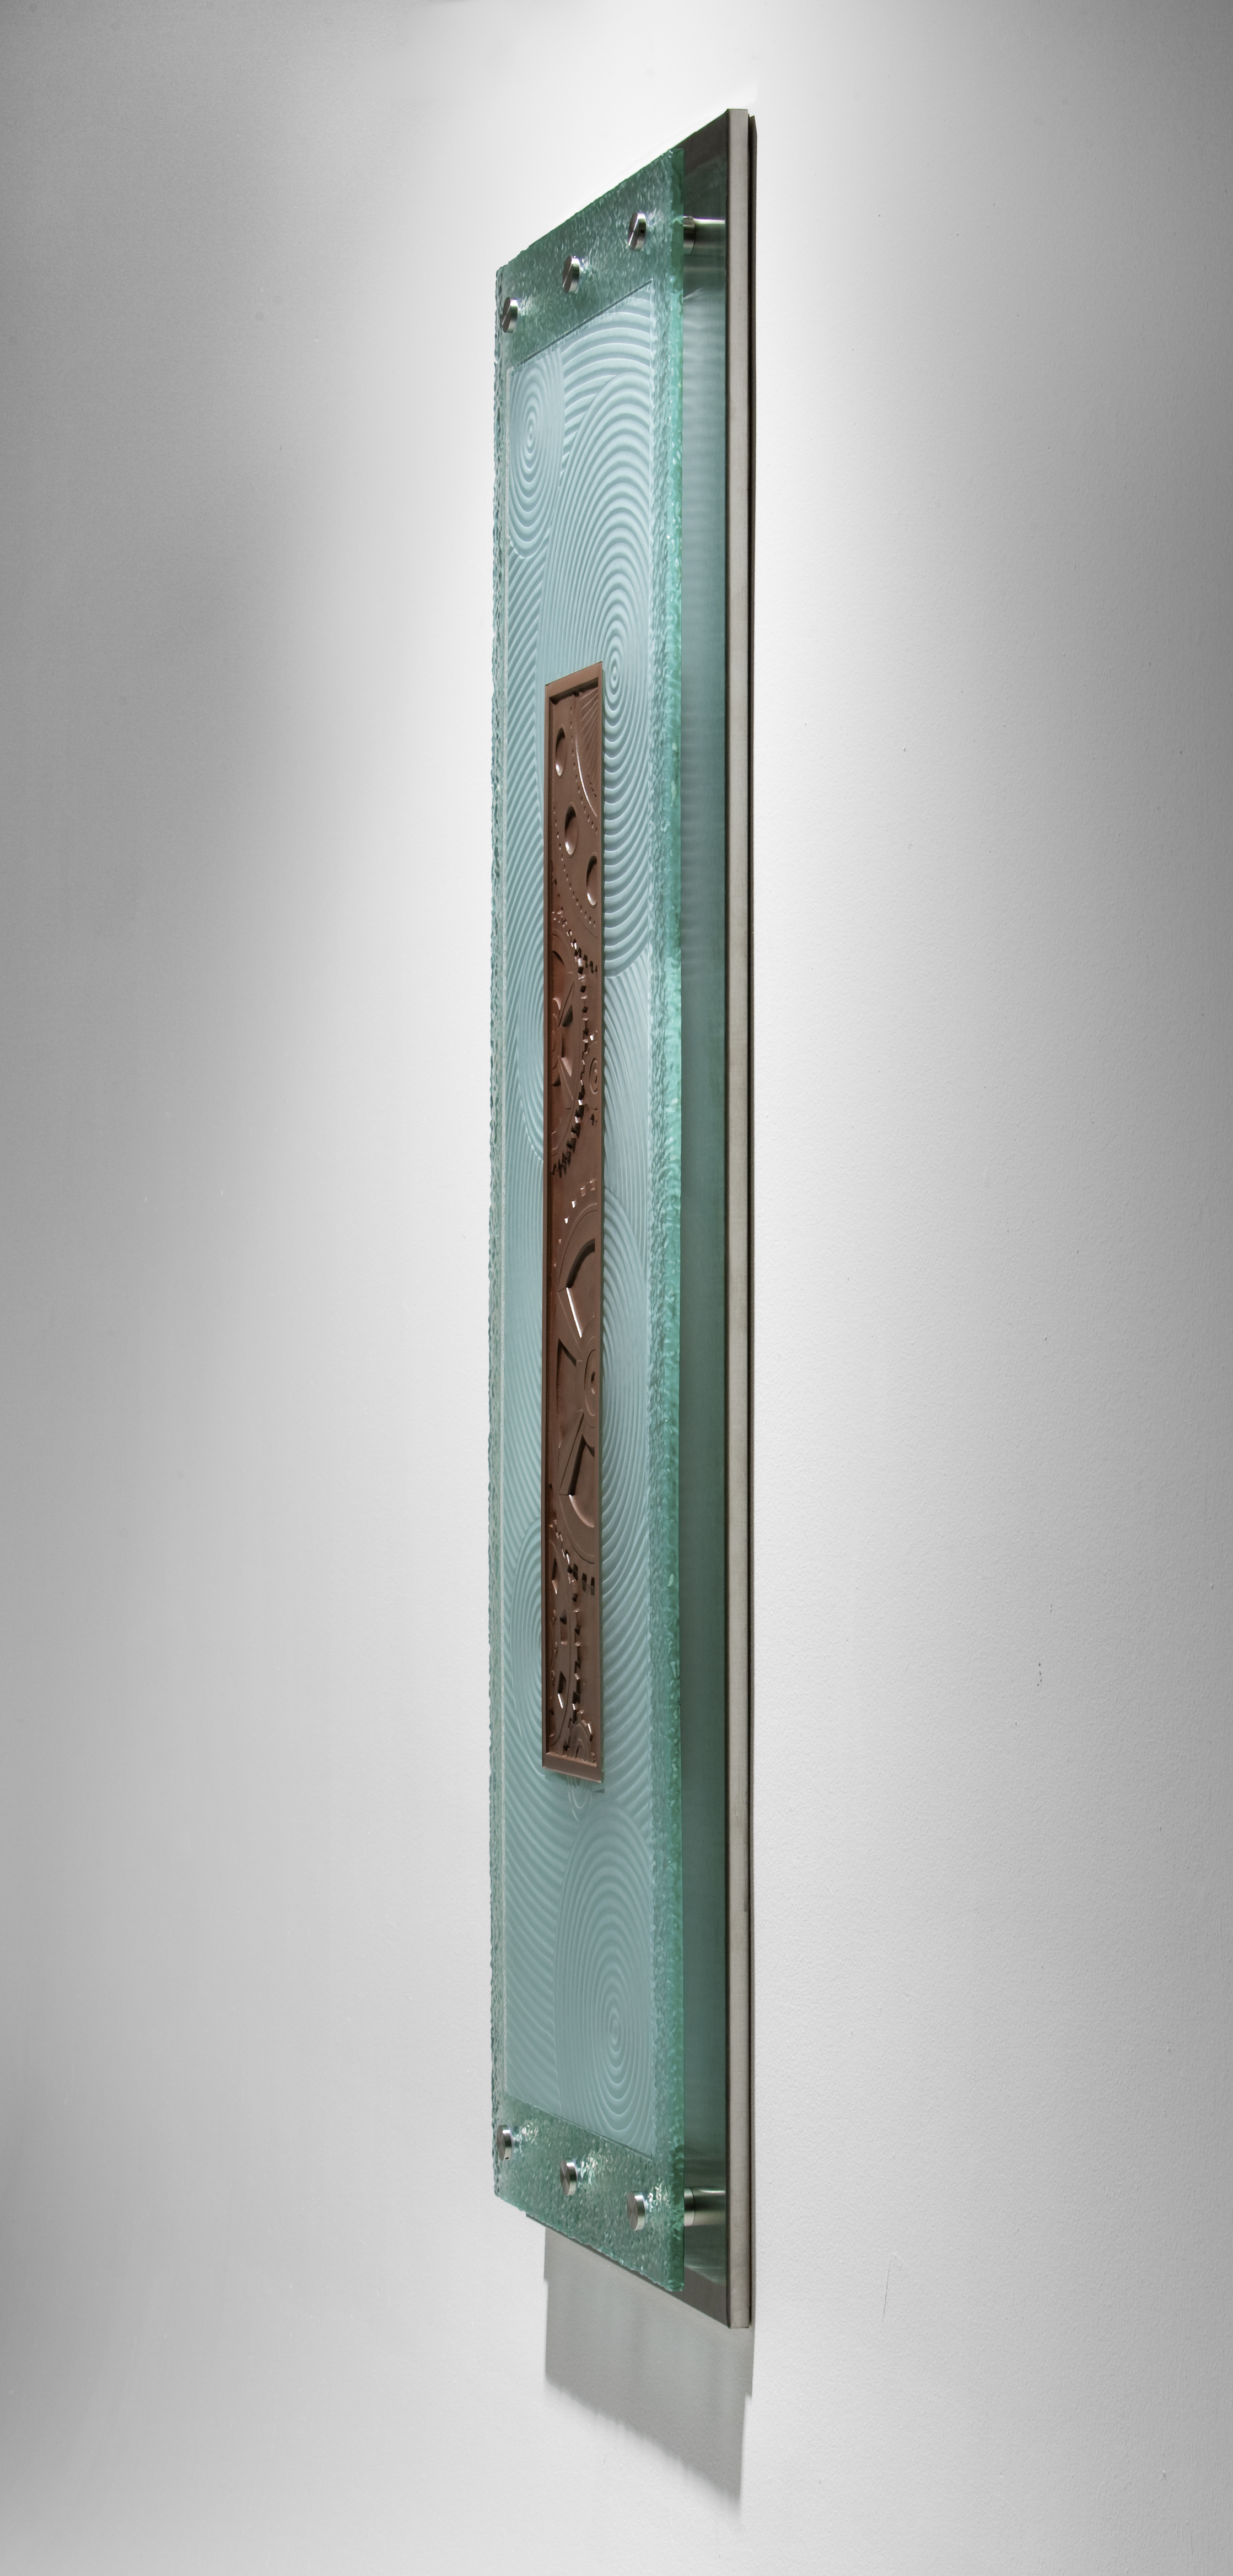 Charles Gabriel_Sculptural Glass_hand-carved and kiln-fired art glass_"Chocolate"_ side view of carved and kil-worked glass mounted on wall with stainless hardware